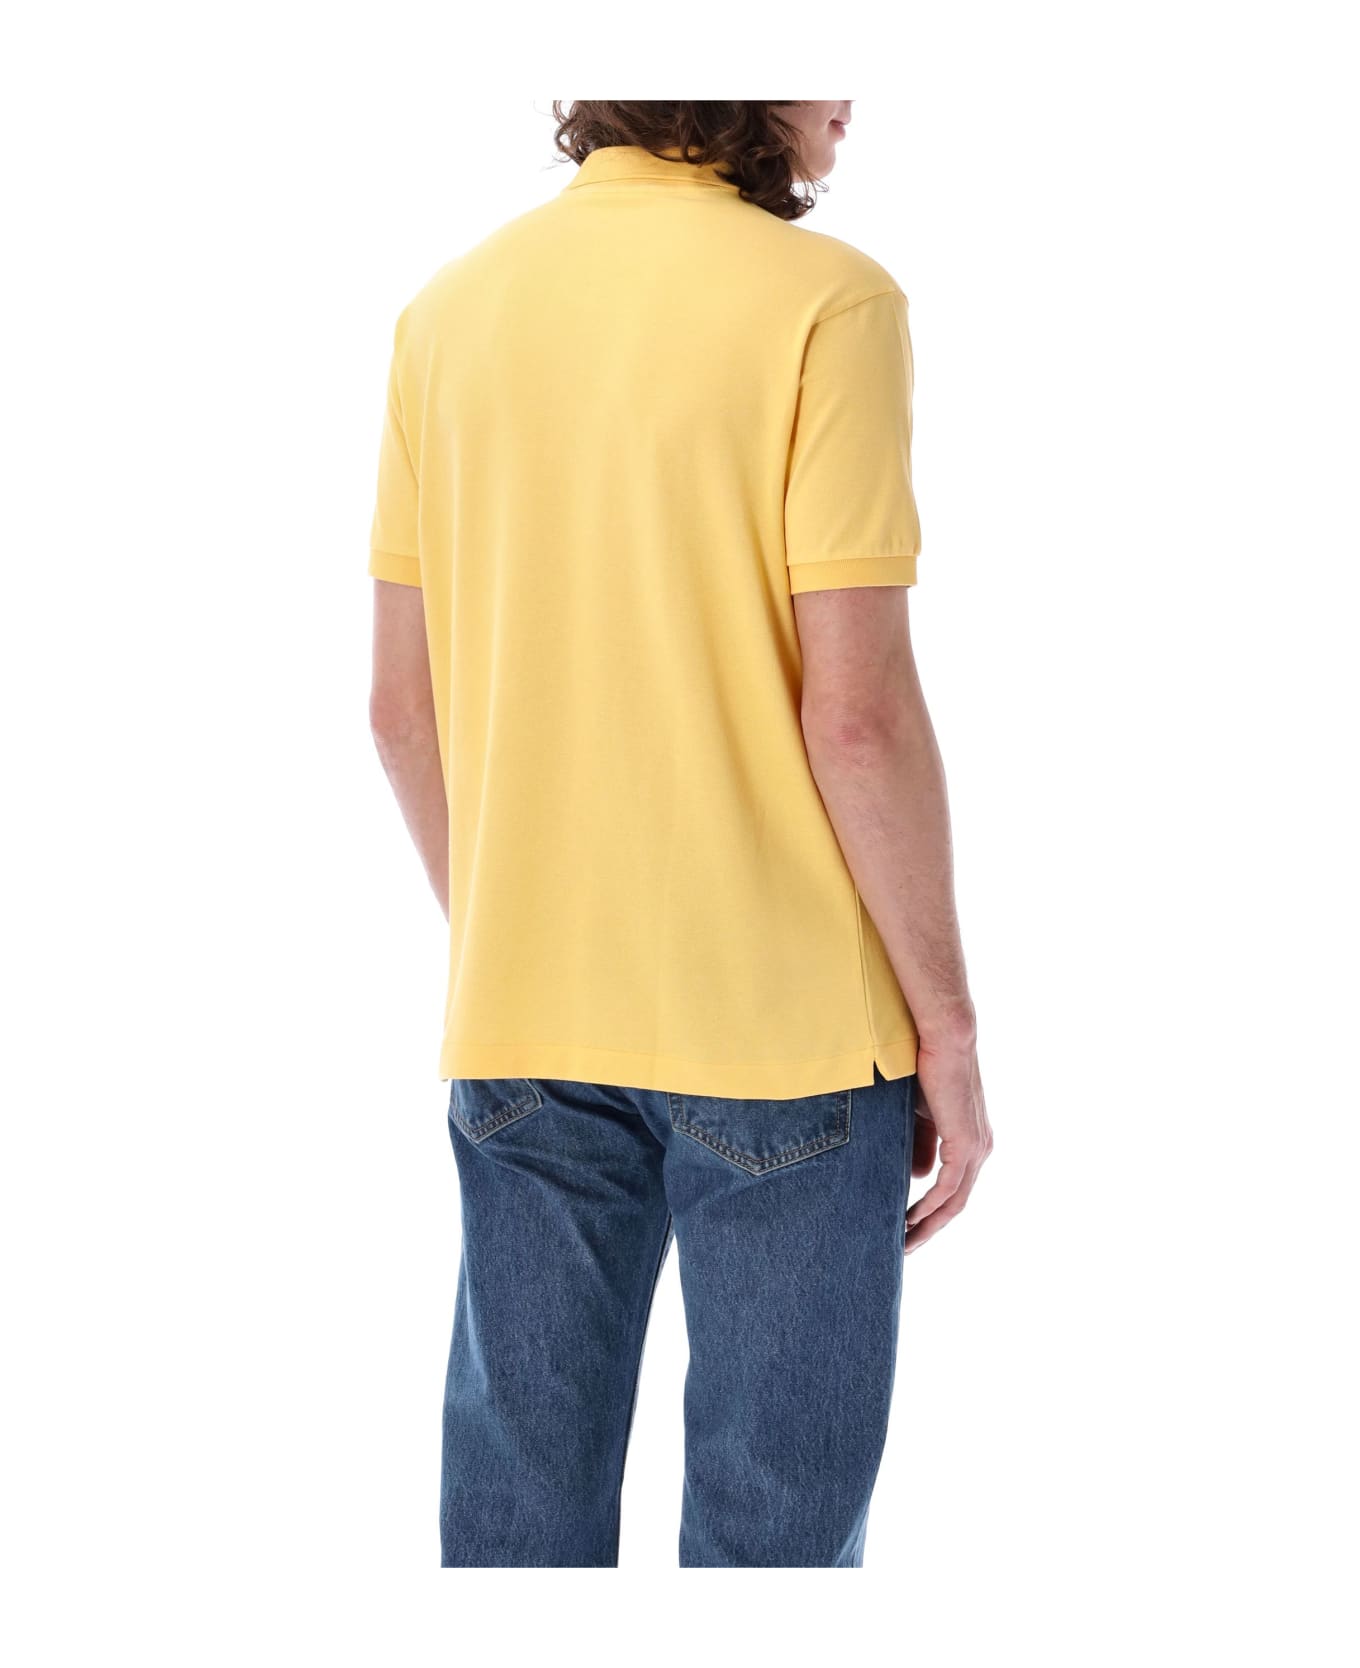 Lacoste Classic Fit Polo Shirt - YELLOW